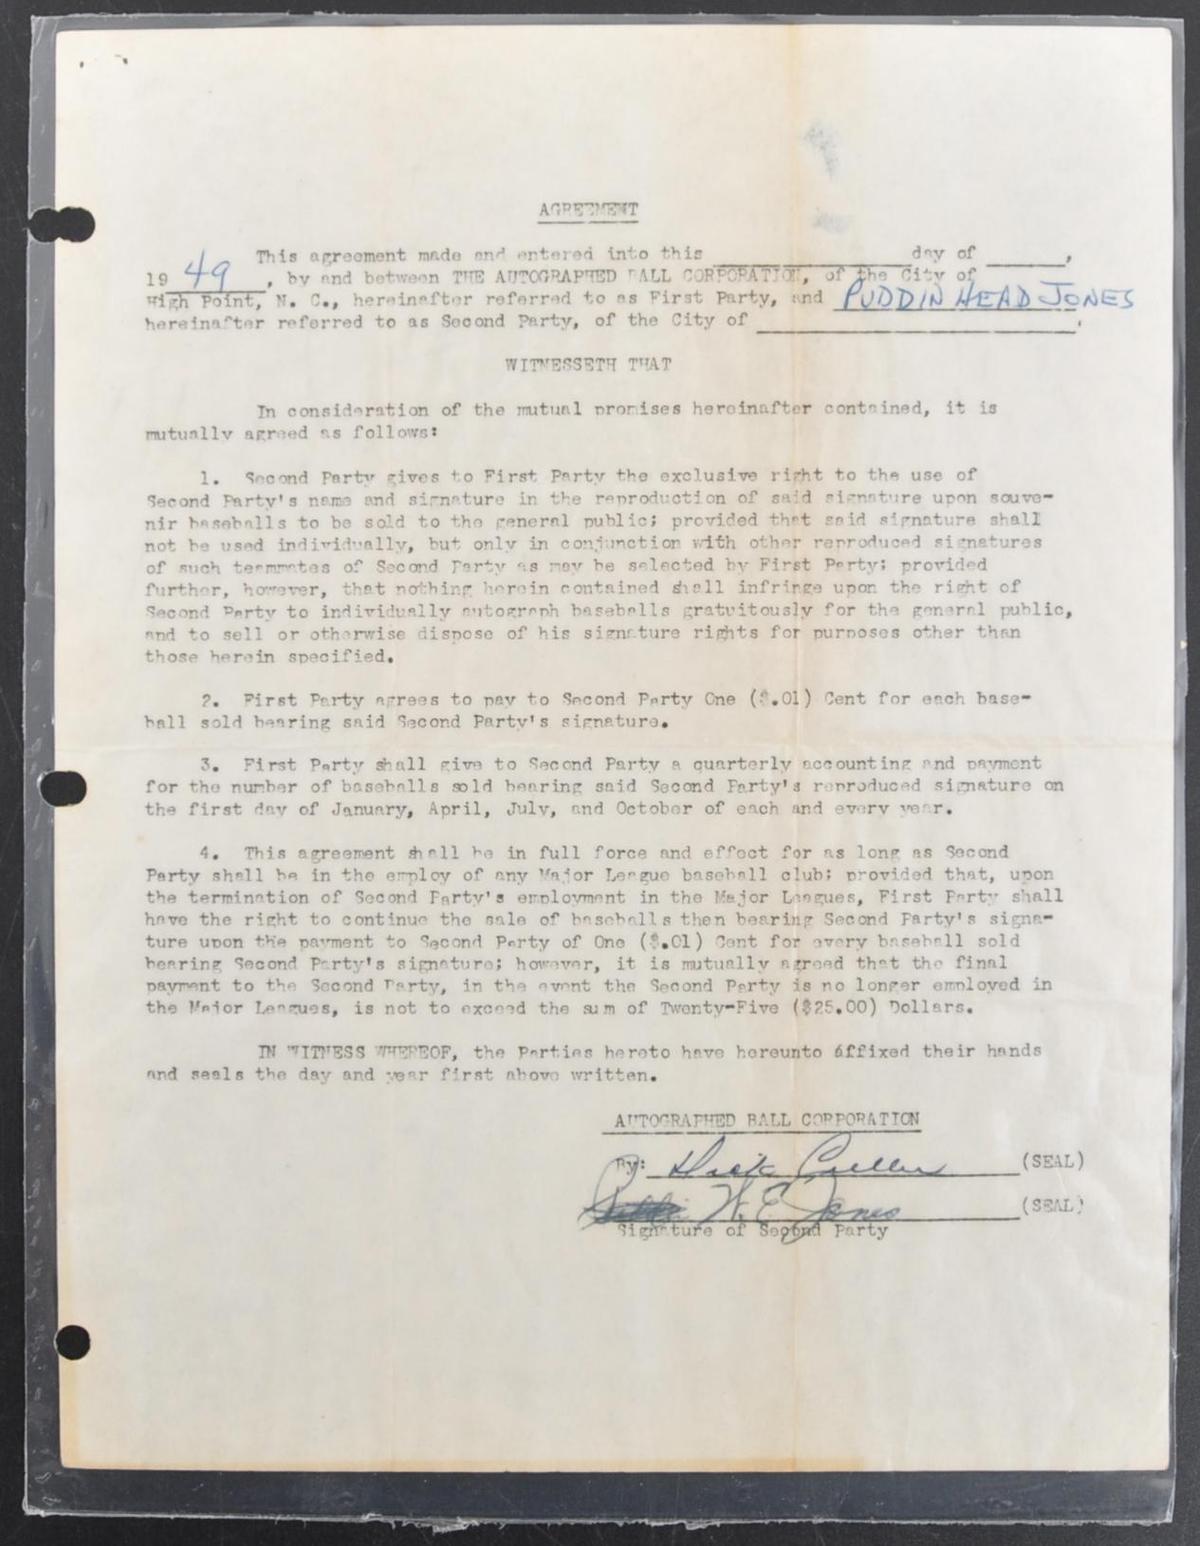 1949 Agreement Between Willie Jones and The Autographed Ball Corporation